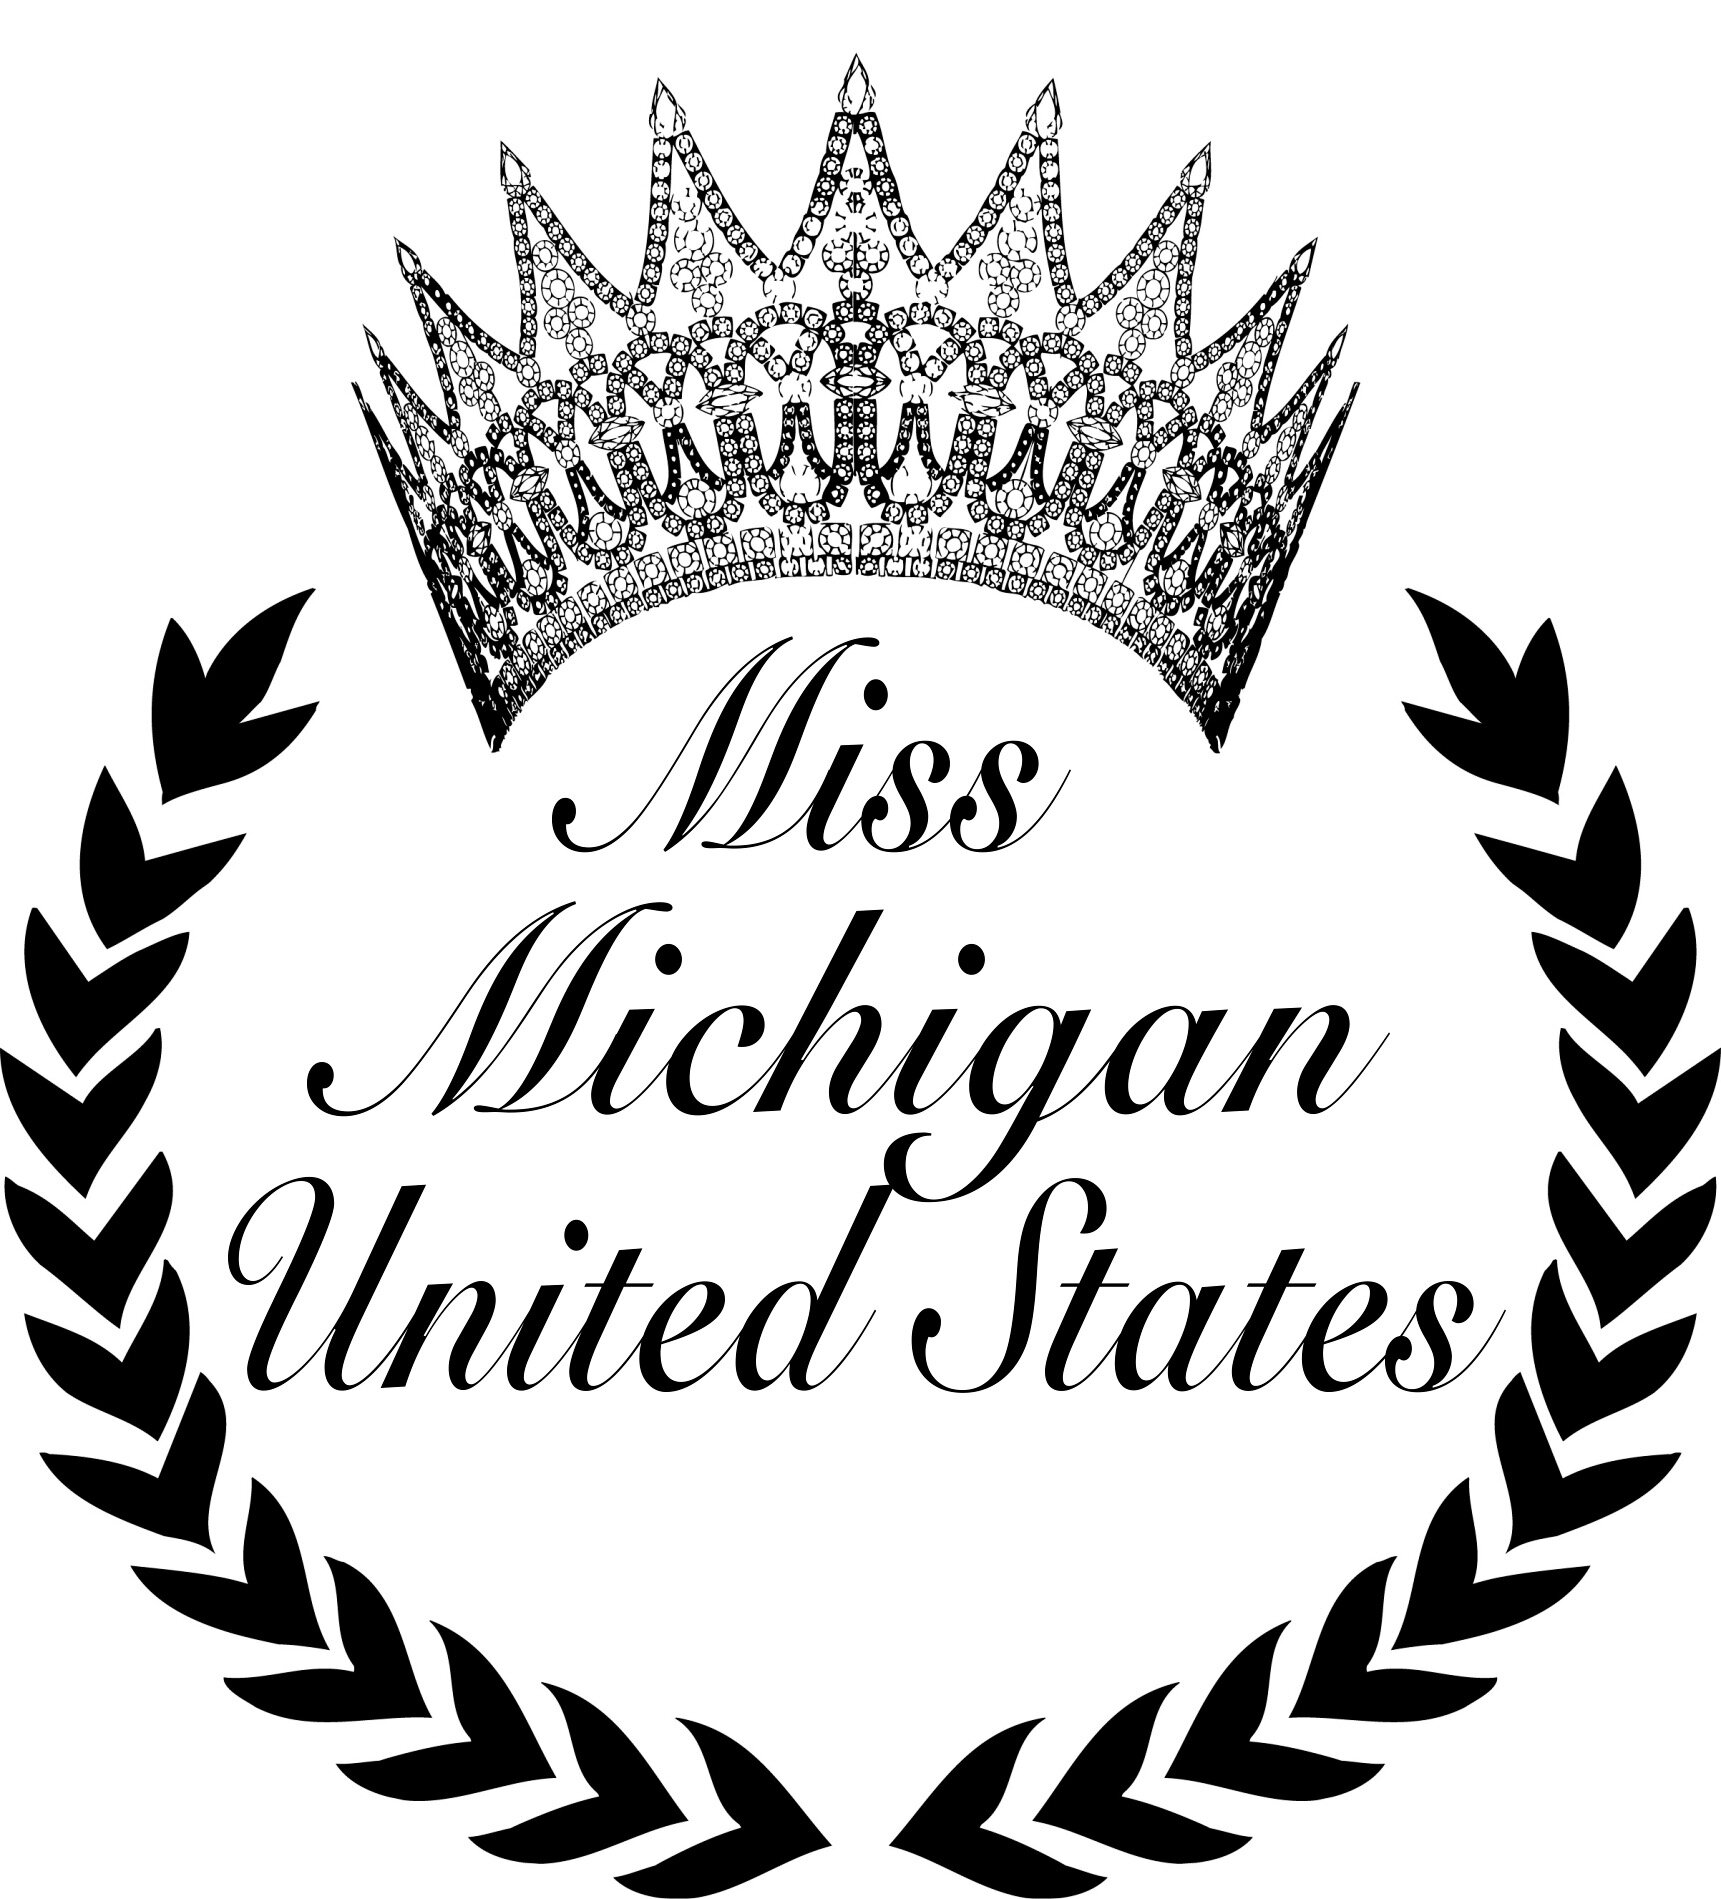 Official Twitter of the Miss Michigan United States Organization